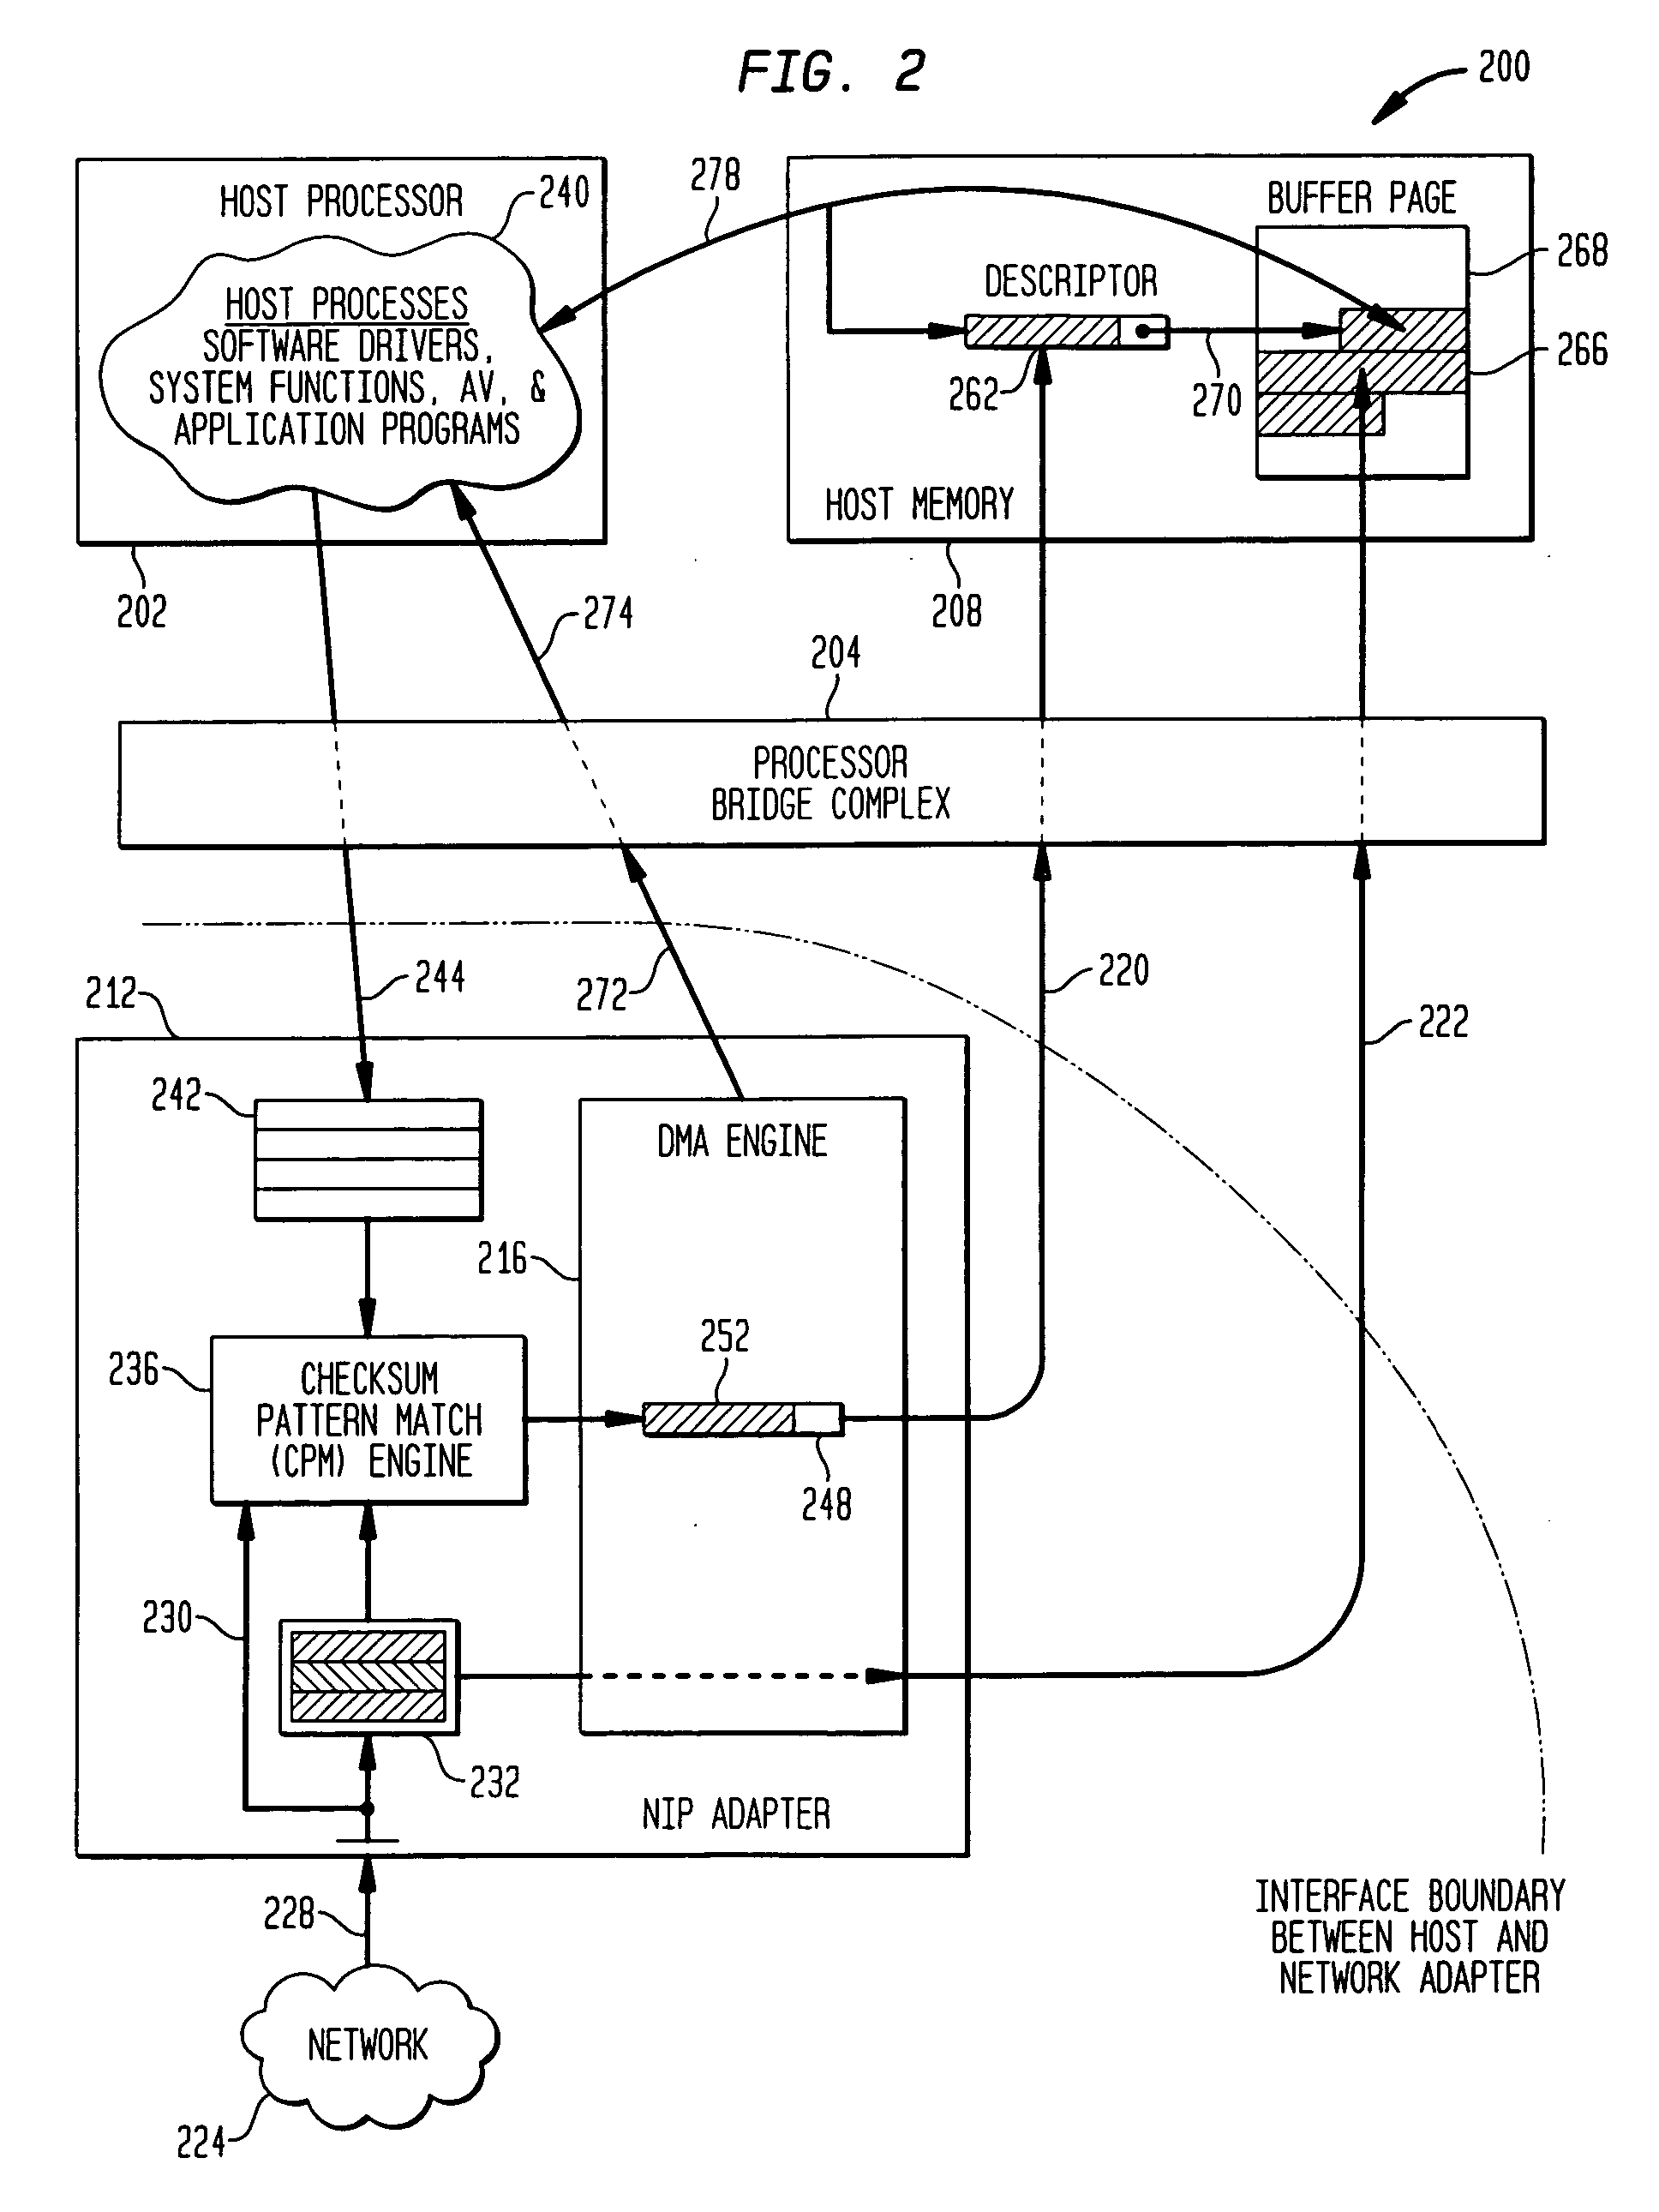 Methods and apparatus for interface adapter integrated virus protection